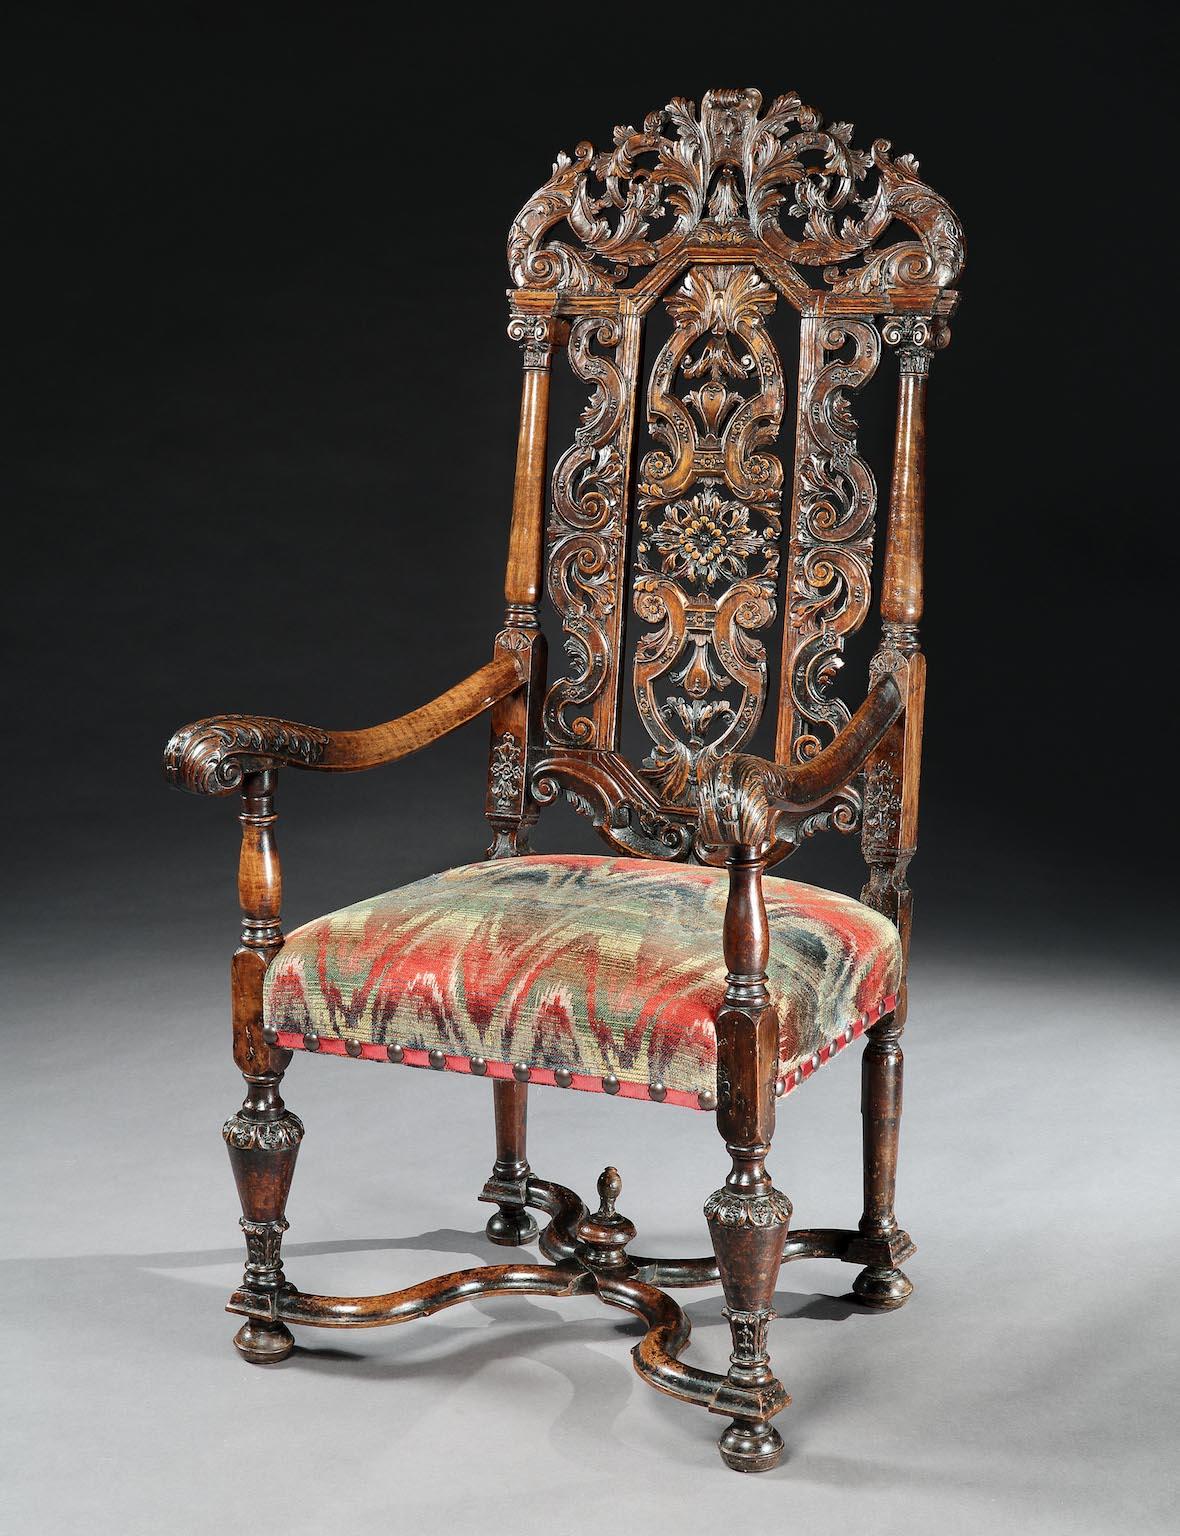 A fine, large, late 17th century, Flemish, open armchair in the style of Daniel Marot with an upholstered seat

This fine, armchair is an, unusually, large size and the carving is of exceptional quality reflecting the status of the owner it was made